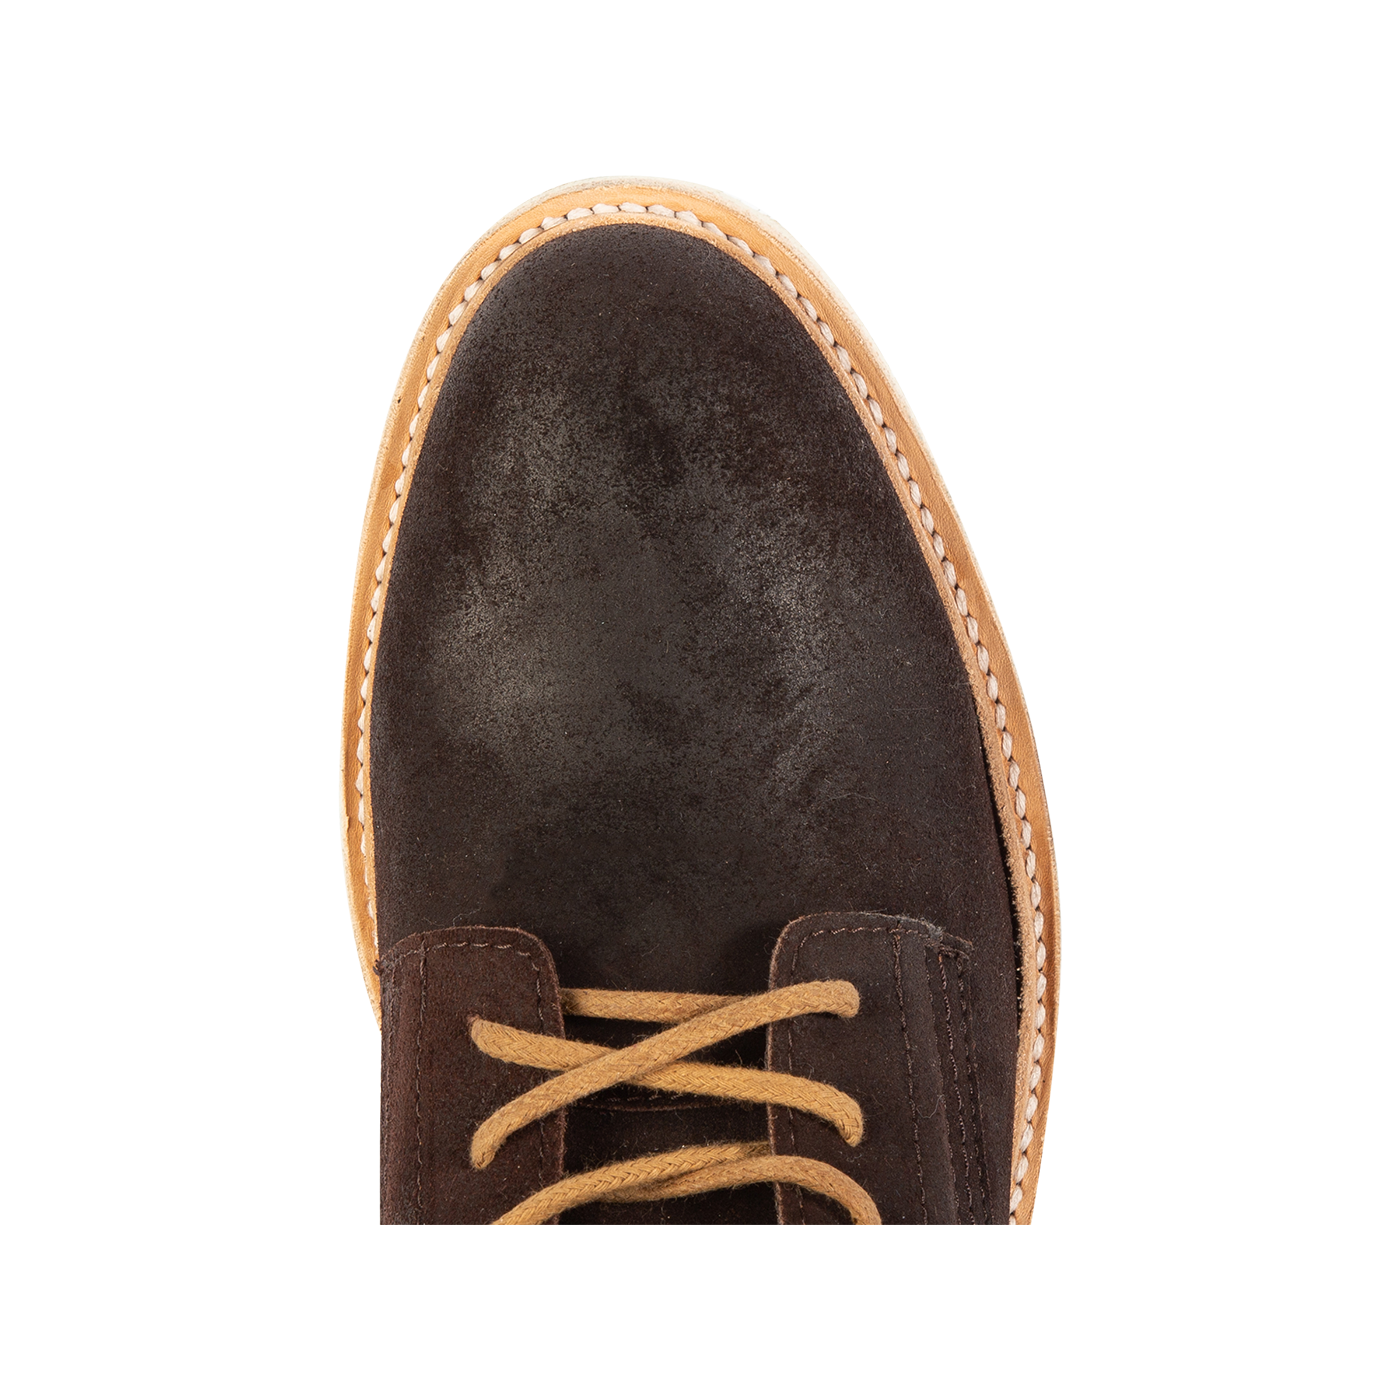 Top view showing almond toe and suede upper on FREEBIRD men's Wheeler brown suede shoe